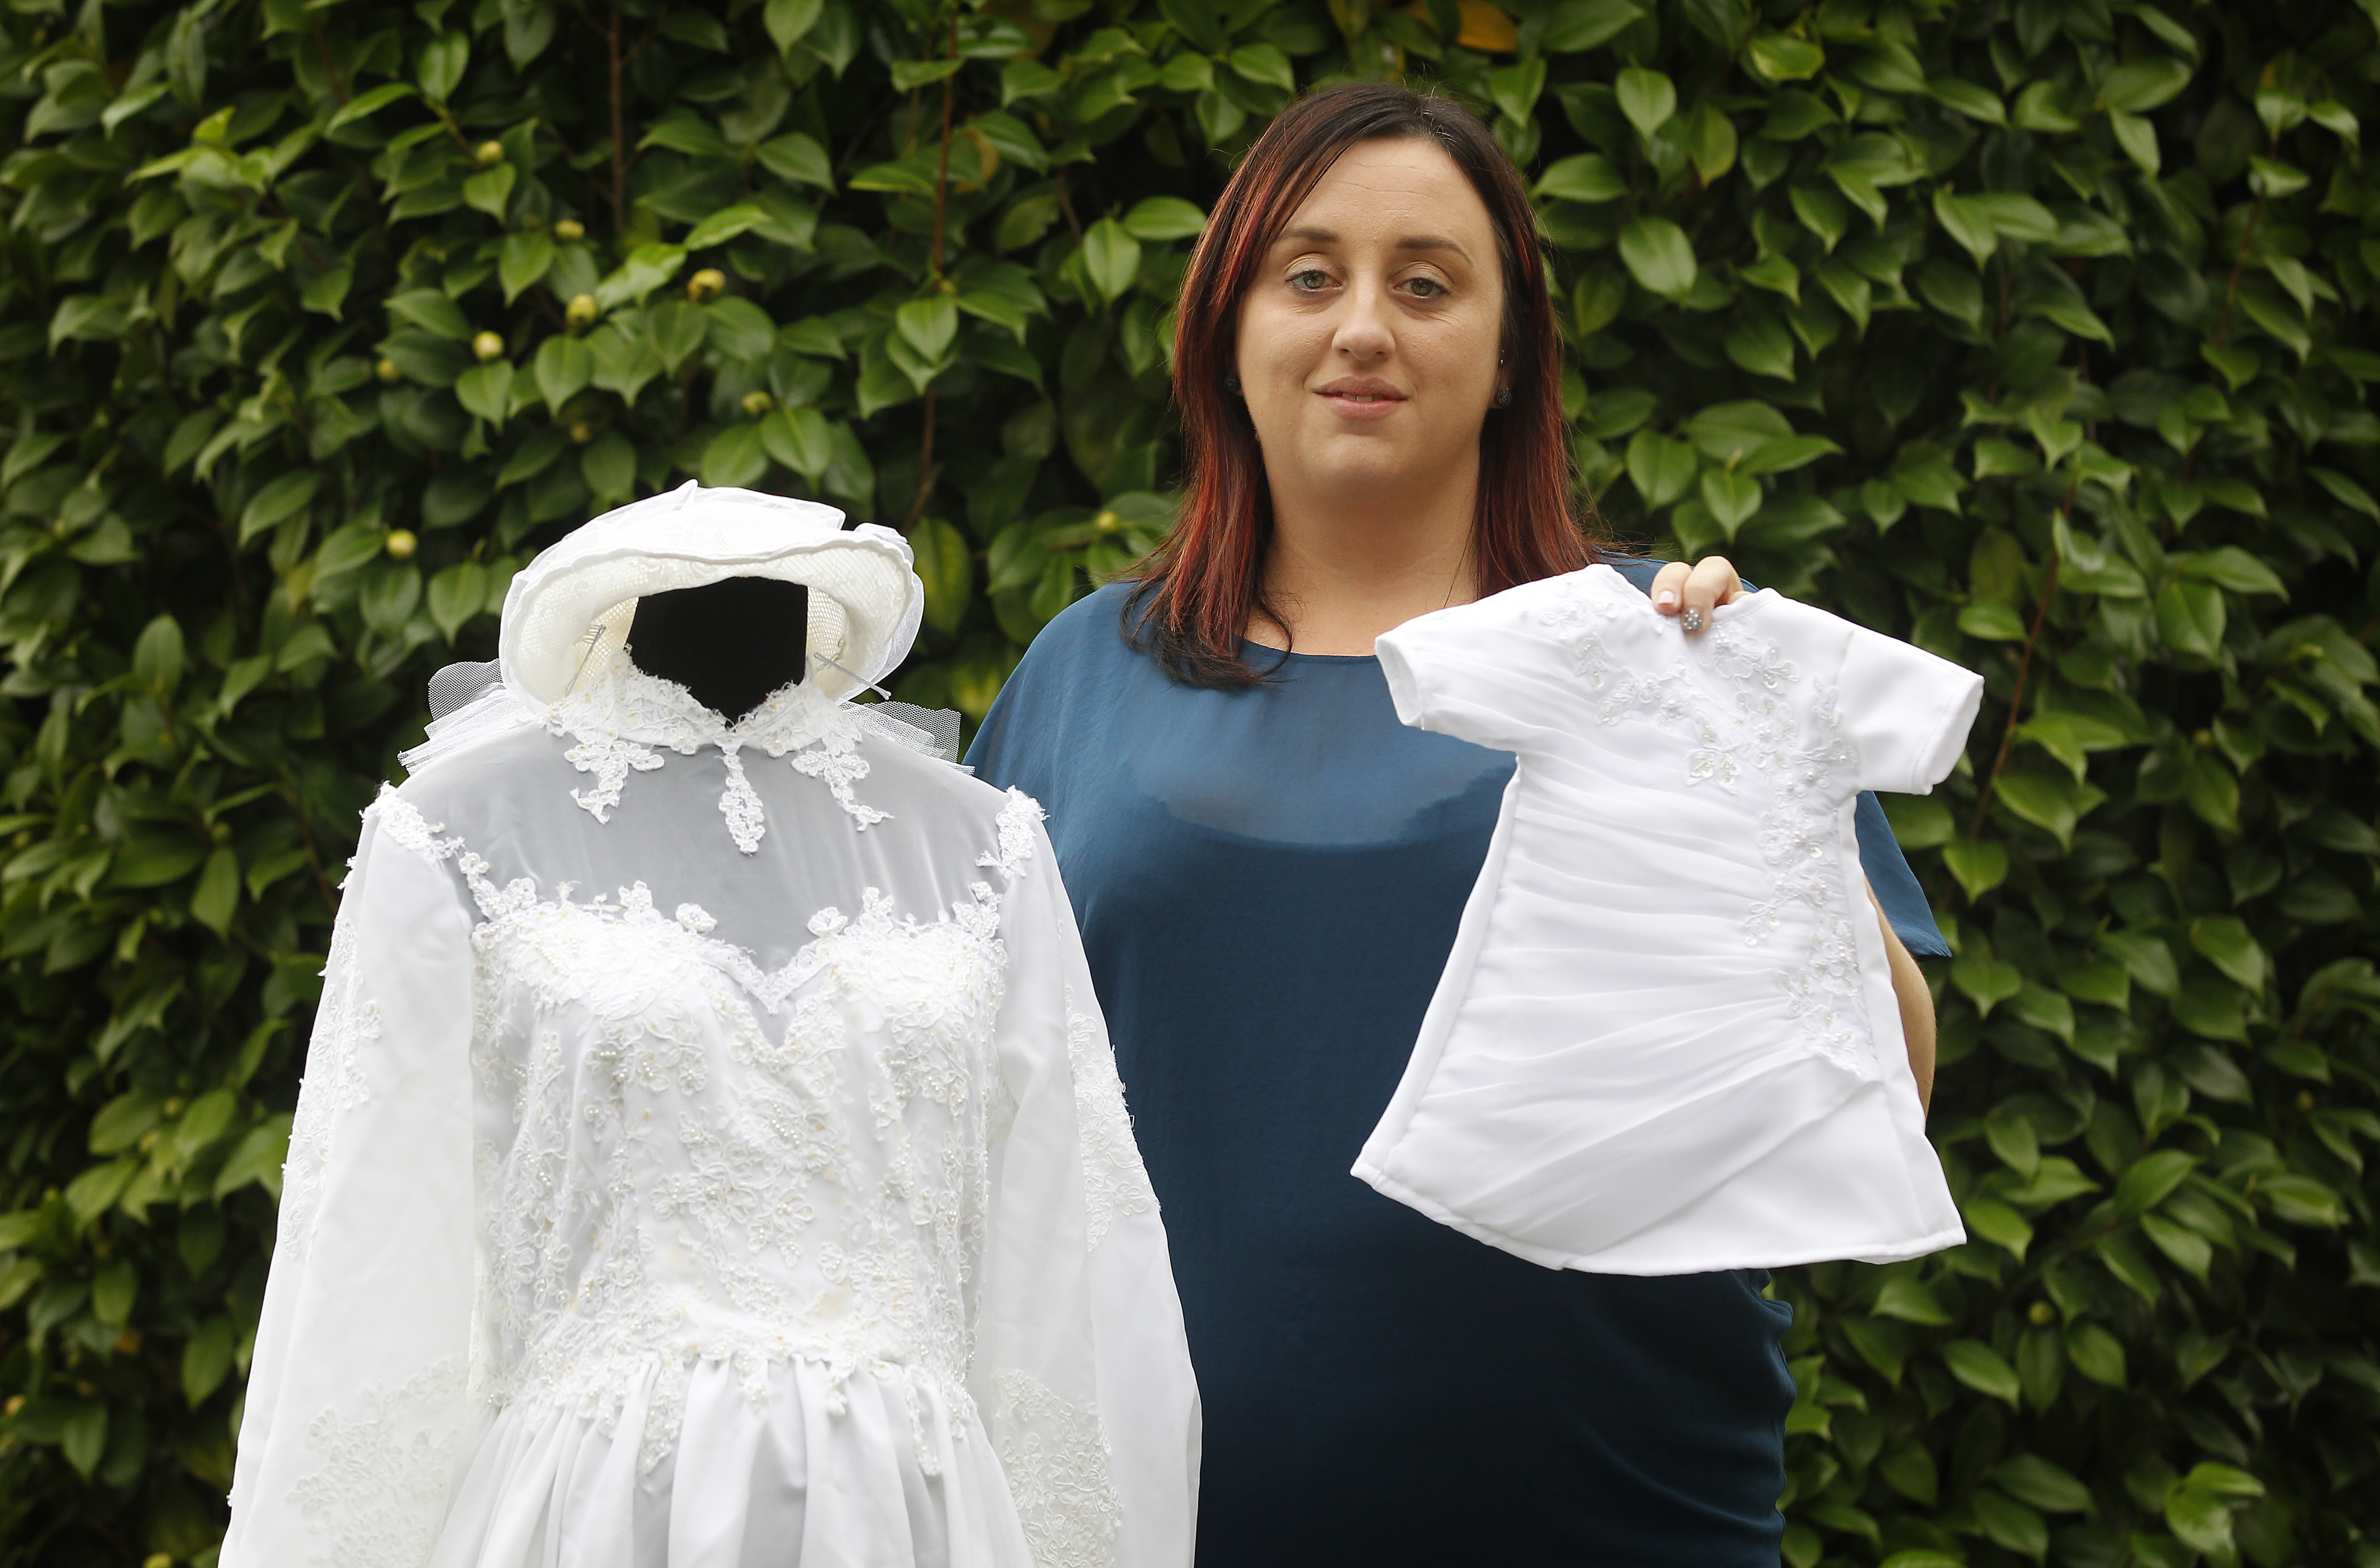 Precious Angel Gowns  A volunteer group based in Ontario who help parents  who have suffered the loss of a baby in the form of burial gowns for infants  aged 16 weeks